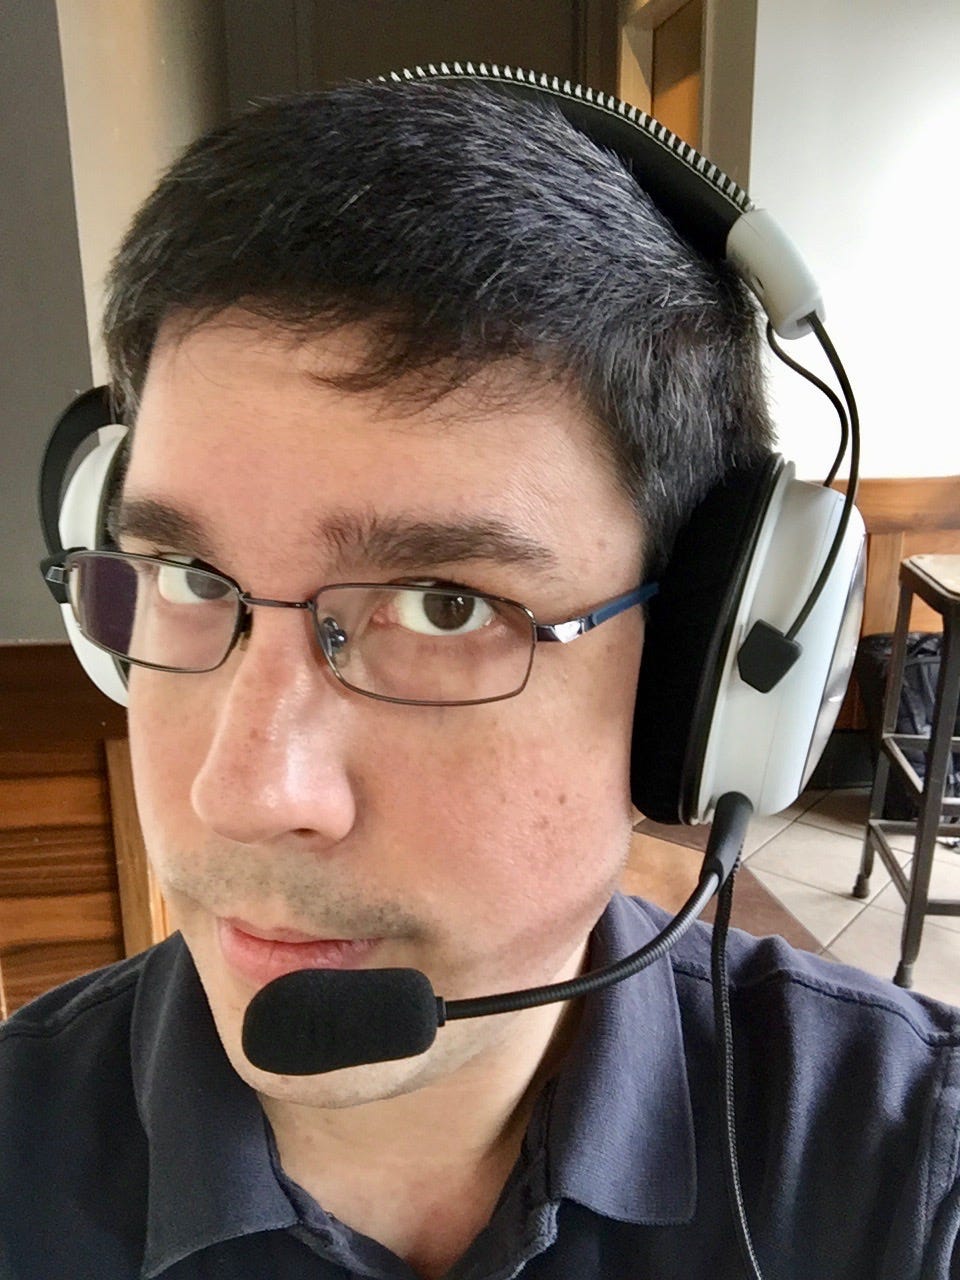 HyperX Cloud I Review and Comparison to Cloud II: “More